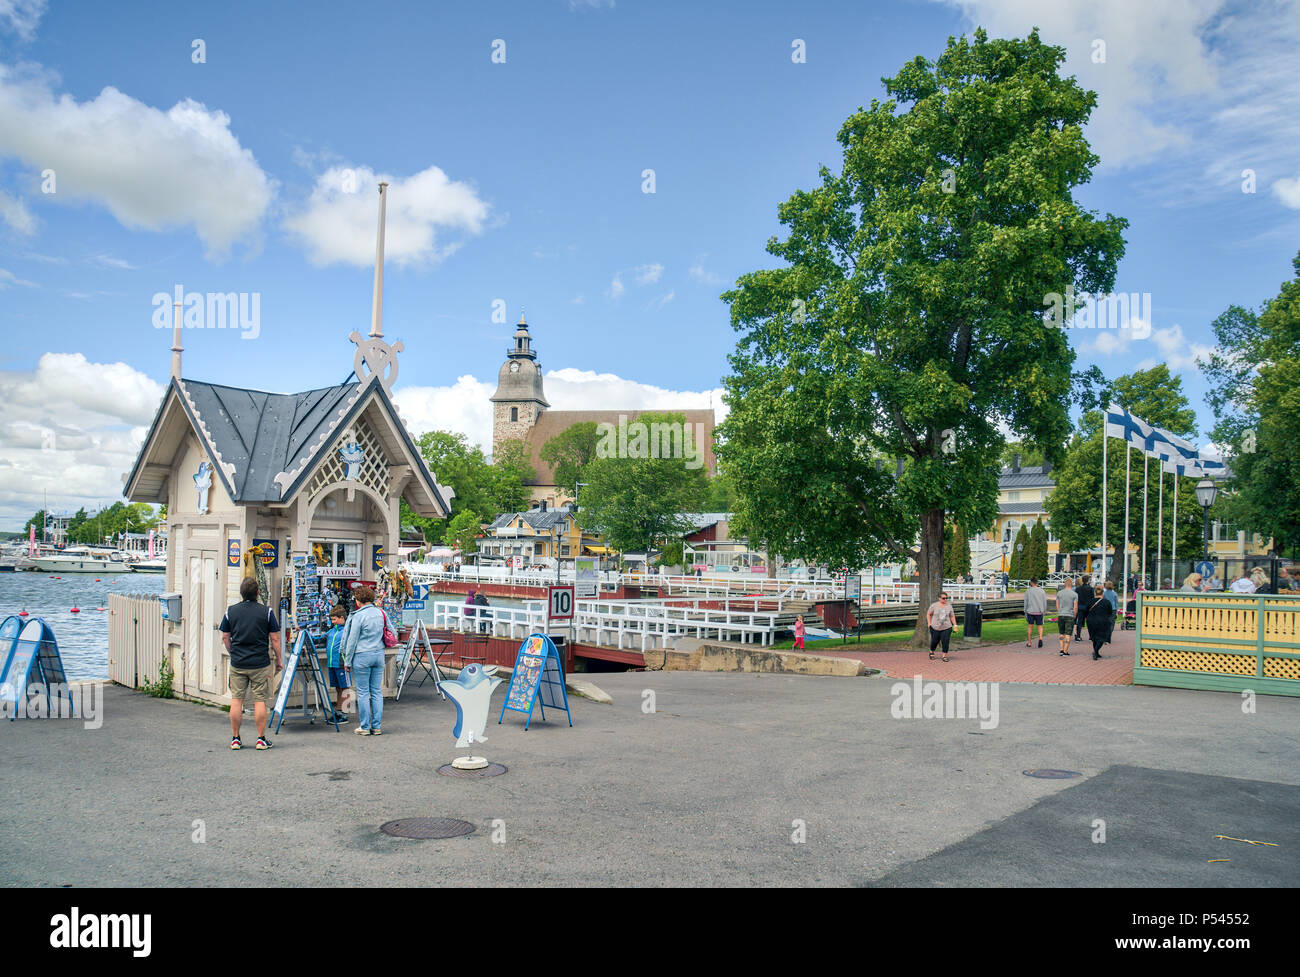 NAANTALI, FINLAND - 23/6/2018: A small souvenier shop with people by with church tower in the background in Naantali harbour Stock Photo